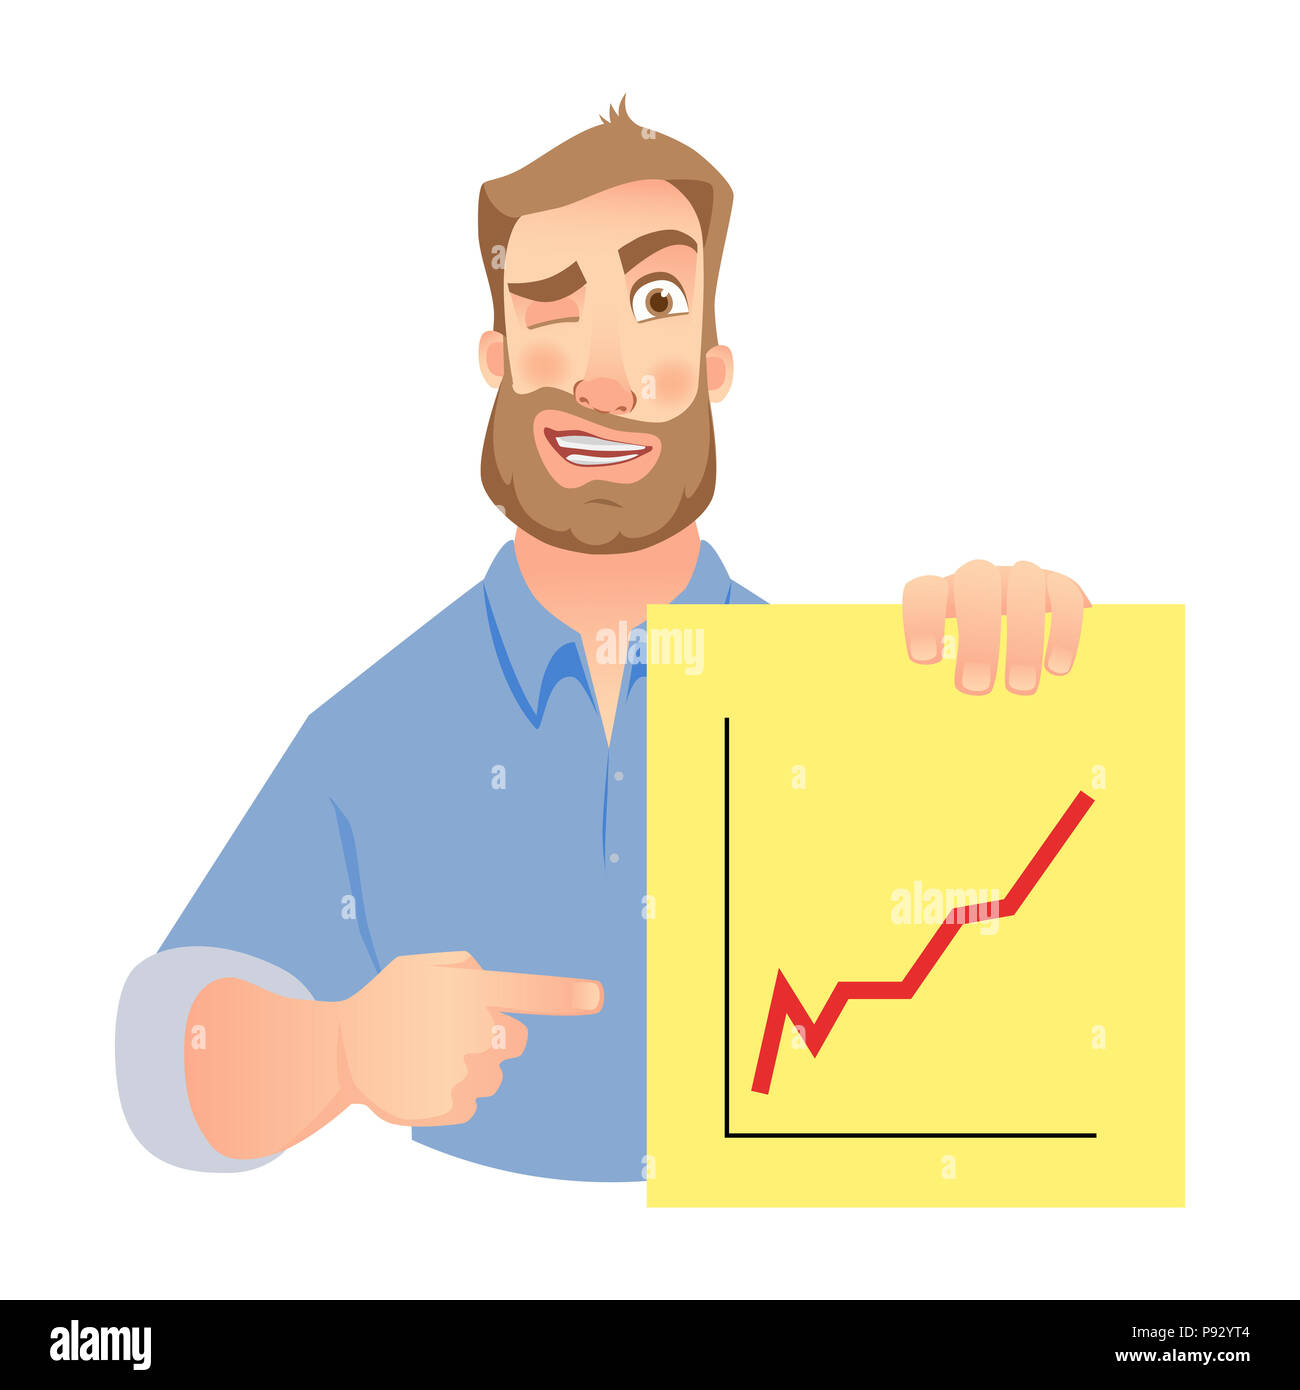 Salesman cartoon Cut Out Stock Images & Pictures - Page 2 - Alamy